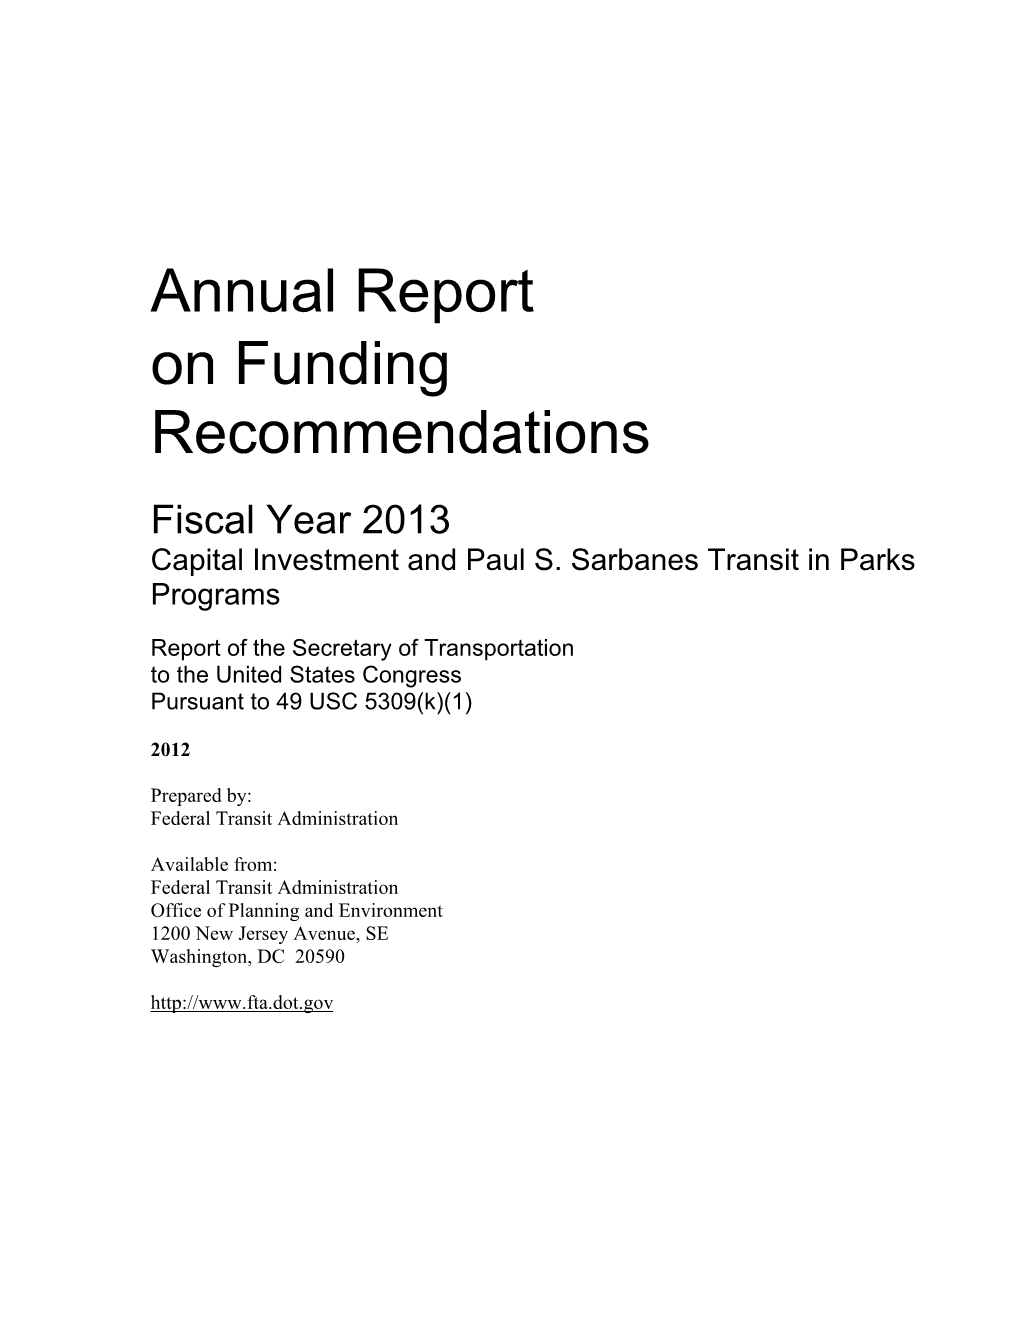 Annual Report on Funding Recommendations